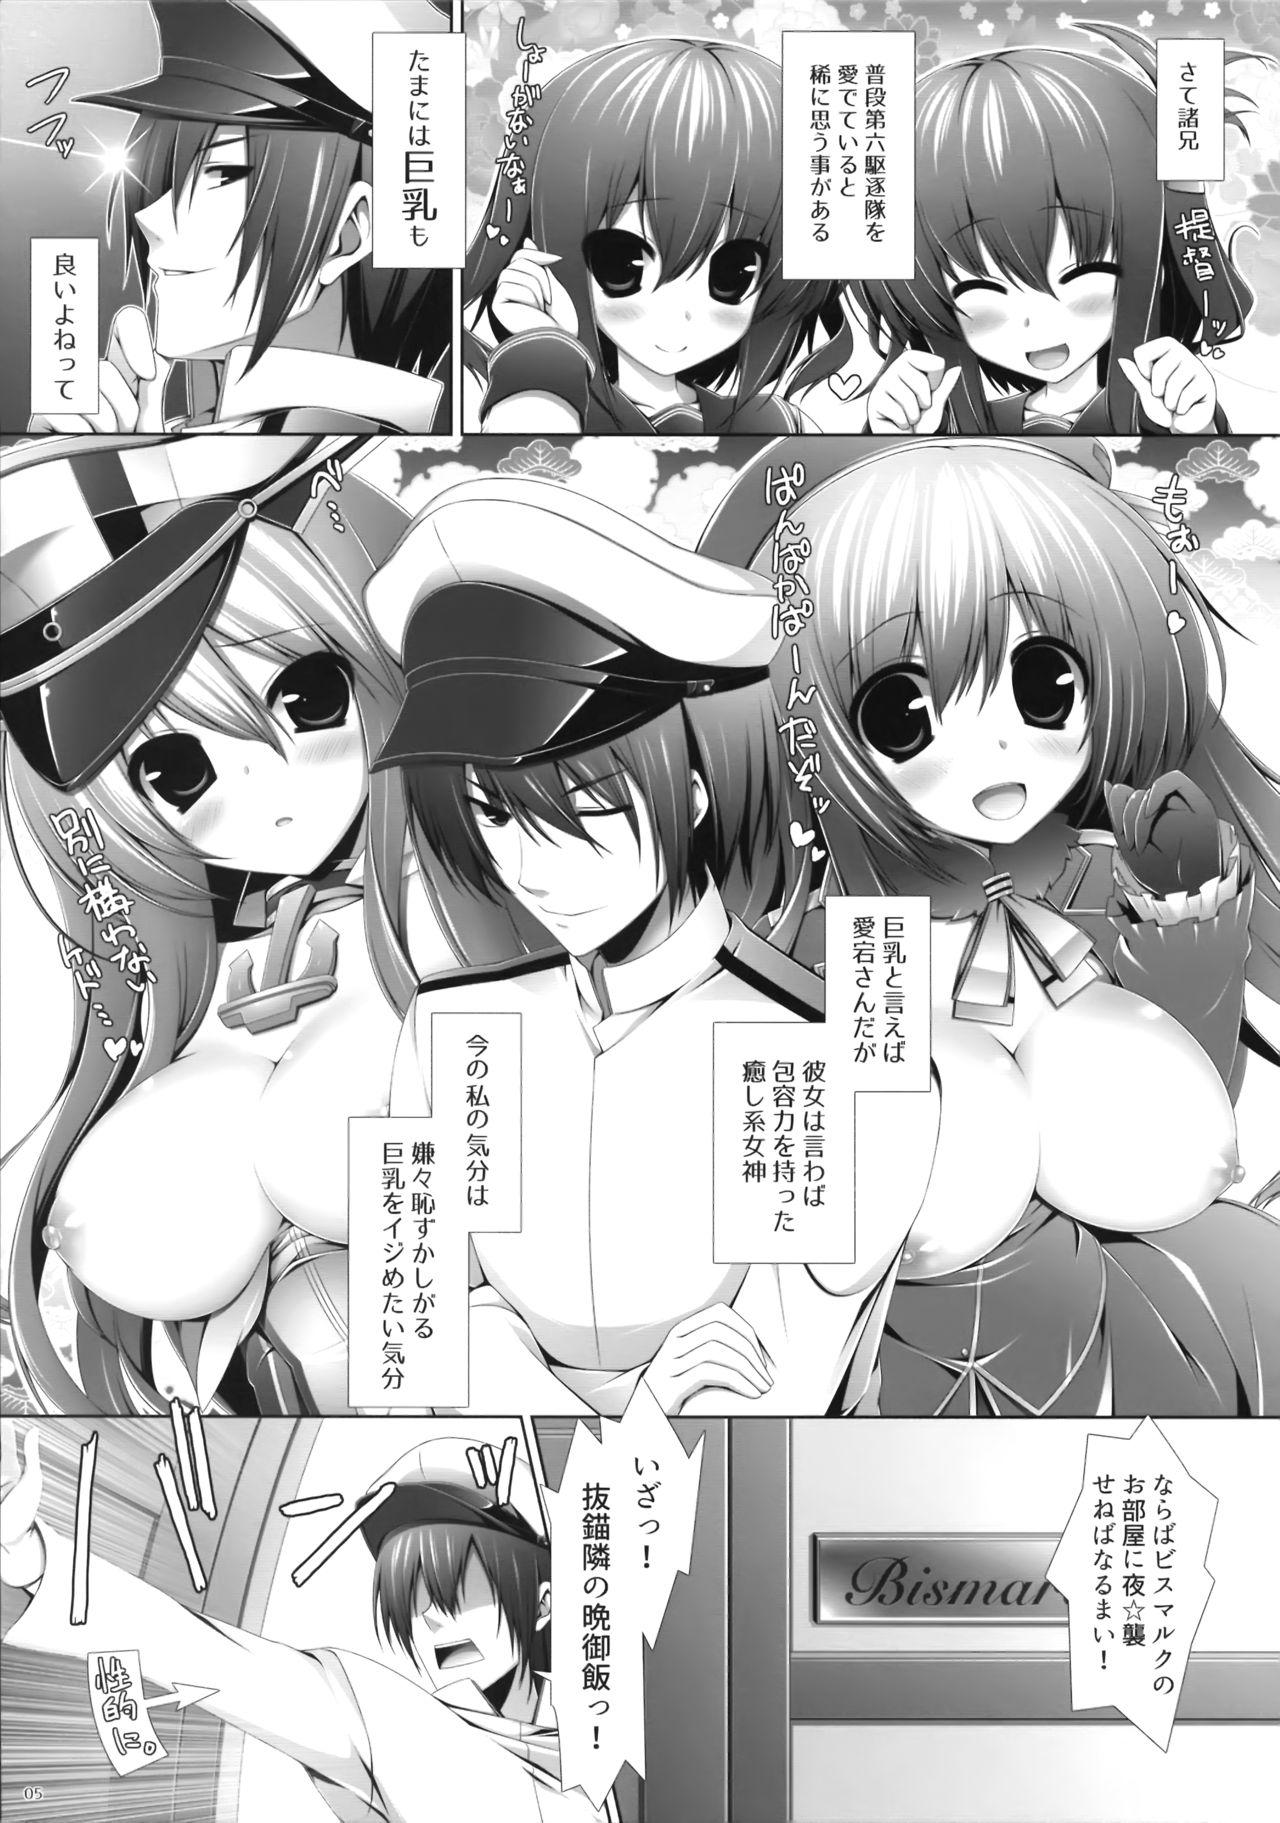 Classy Night battle ship girls - Kantai collection Lesbians - Page 4